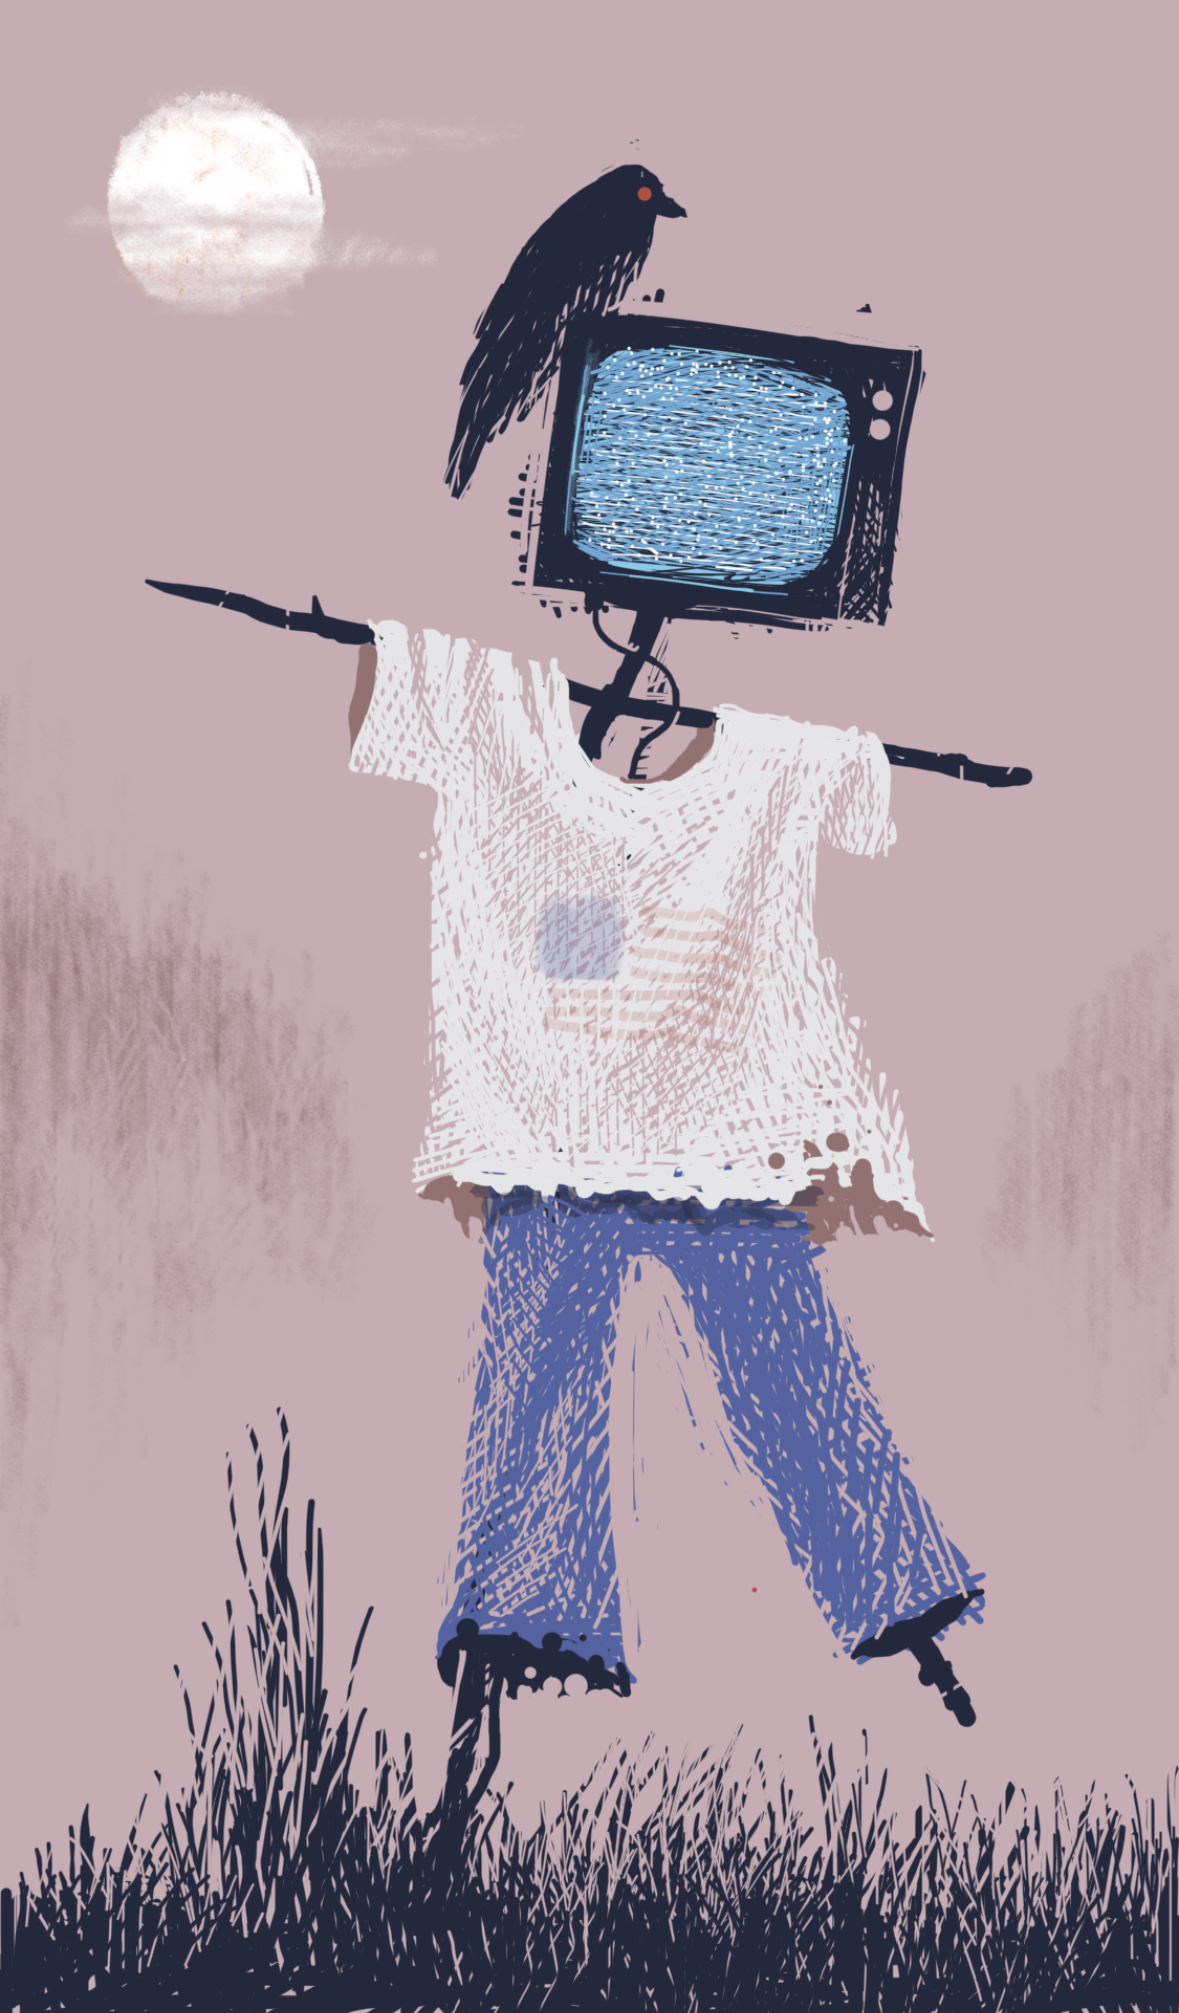 A scarecrow with a television for a head, and a tattered shirt bearing an American flag stands in a meadow. A crow is perched on the TV, which is set to a dead station.